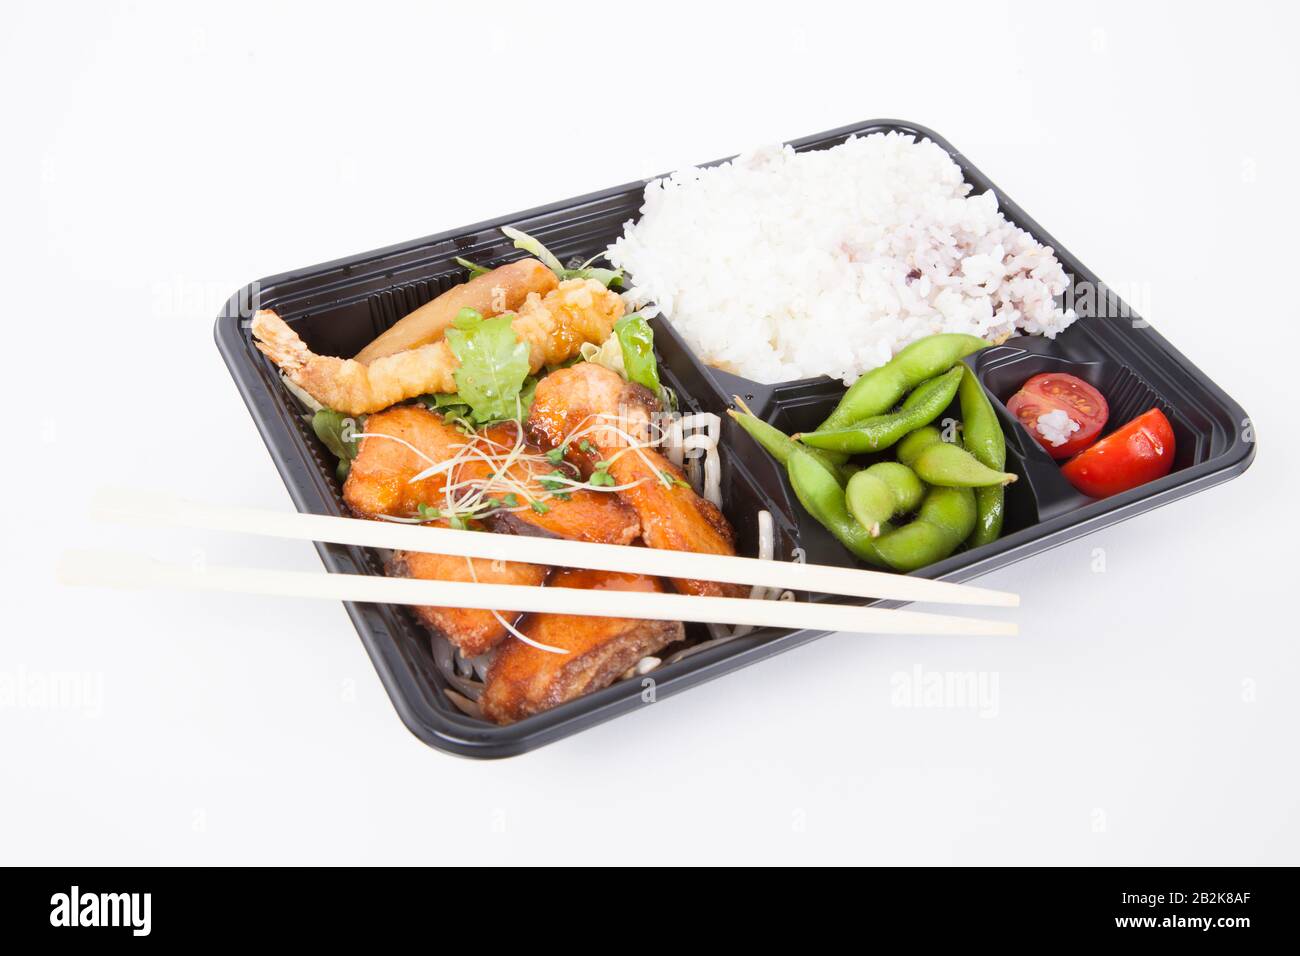 Healthy food served in tray with chopsticks over white background Stock Photo